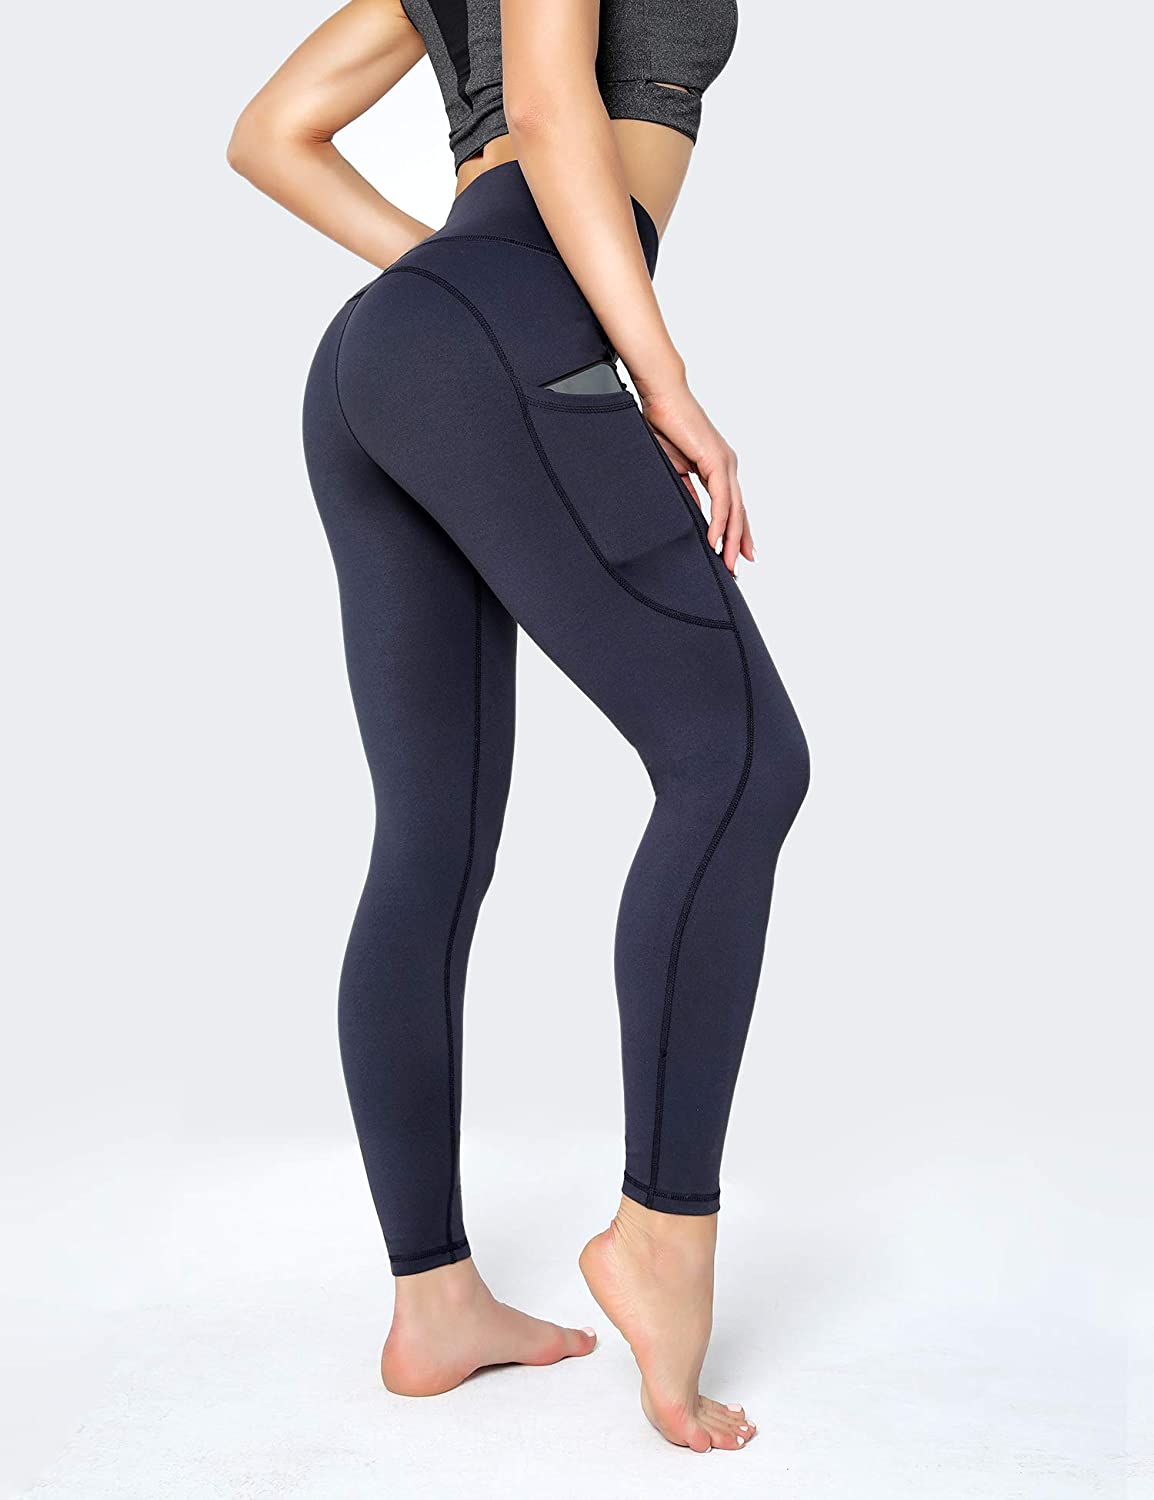 POSHDIVAH Ultra Soft Yoga Pants for Women High Waisted, Eclipse Blue ...